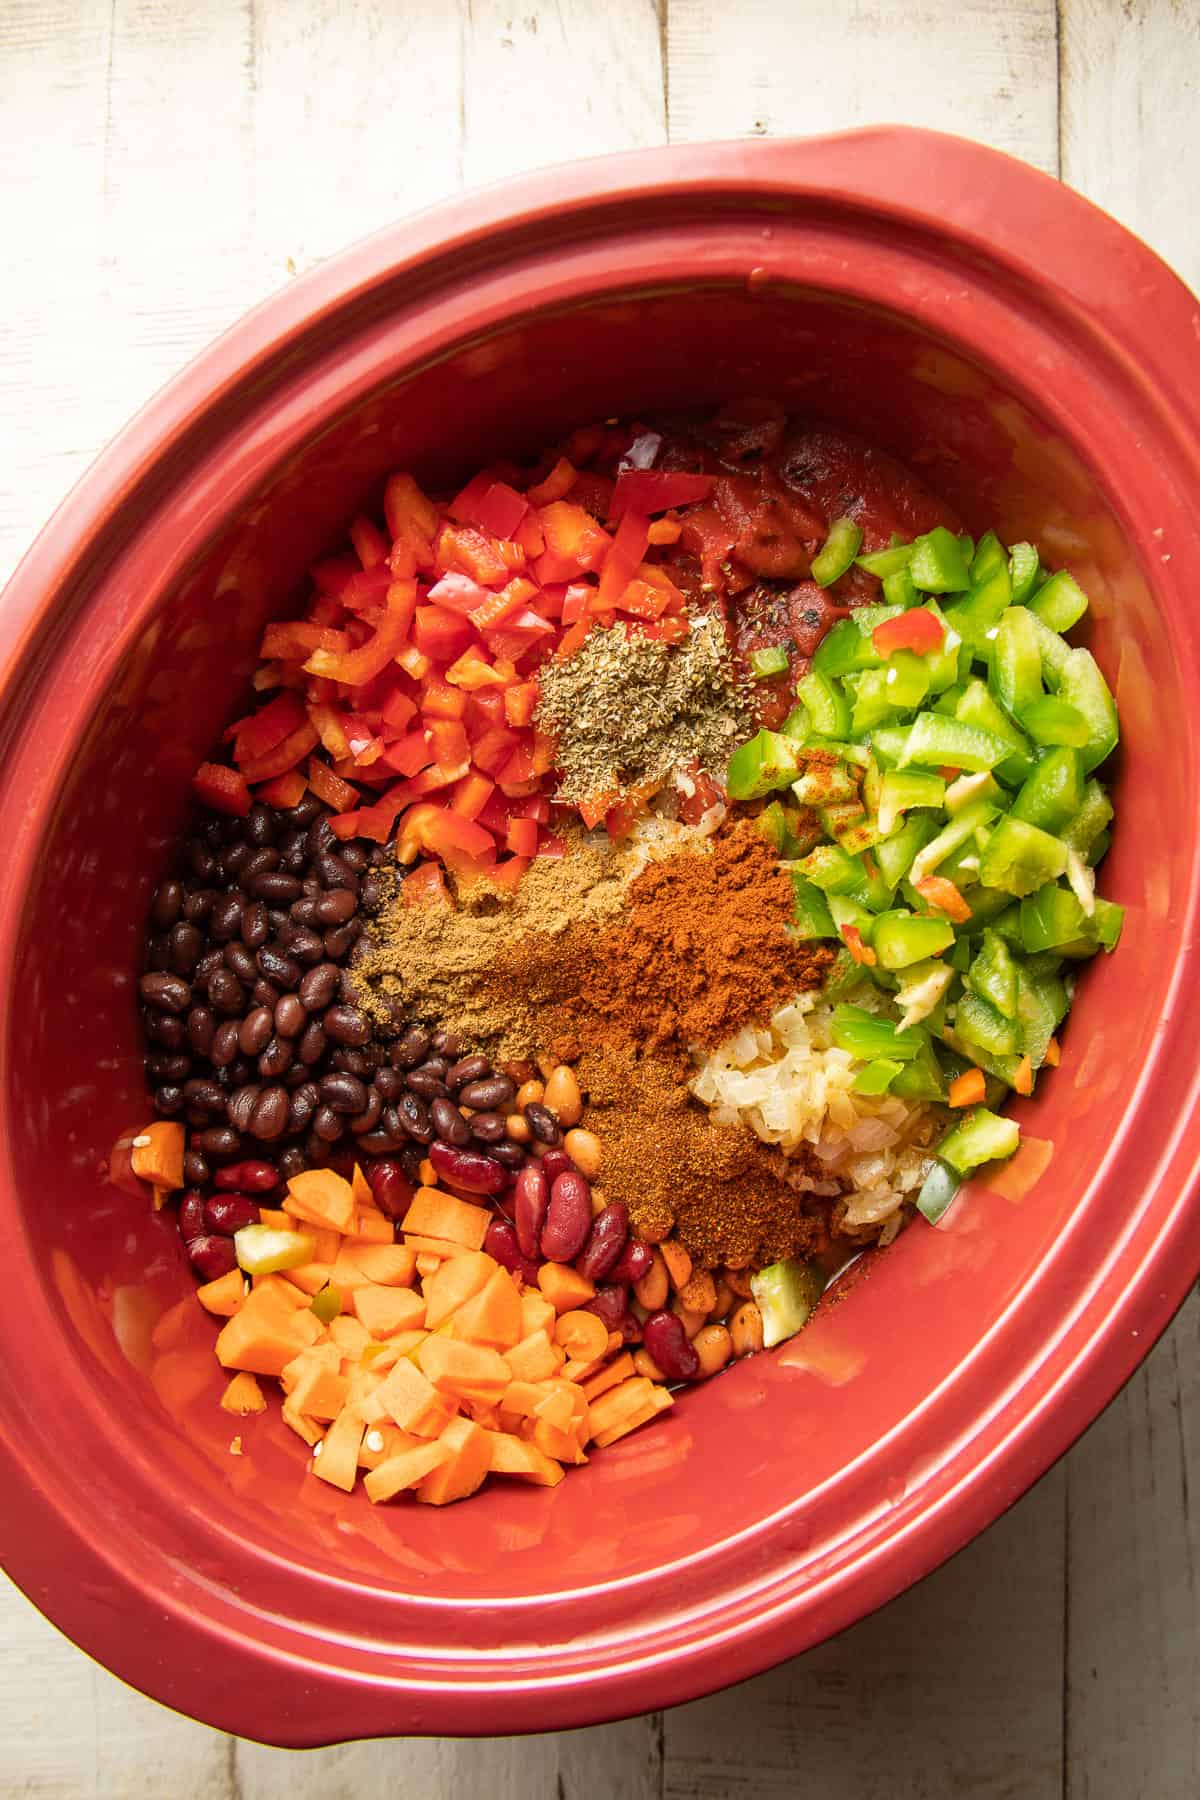 Ingredients for making vegan chili in a slow cooker.